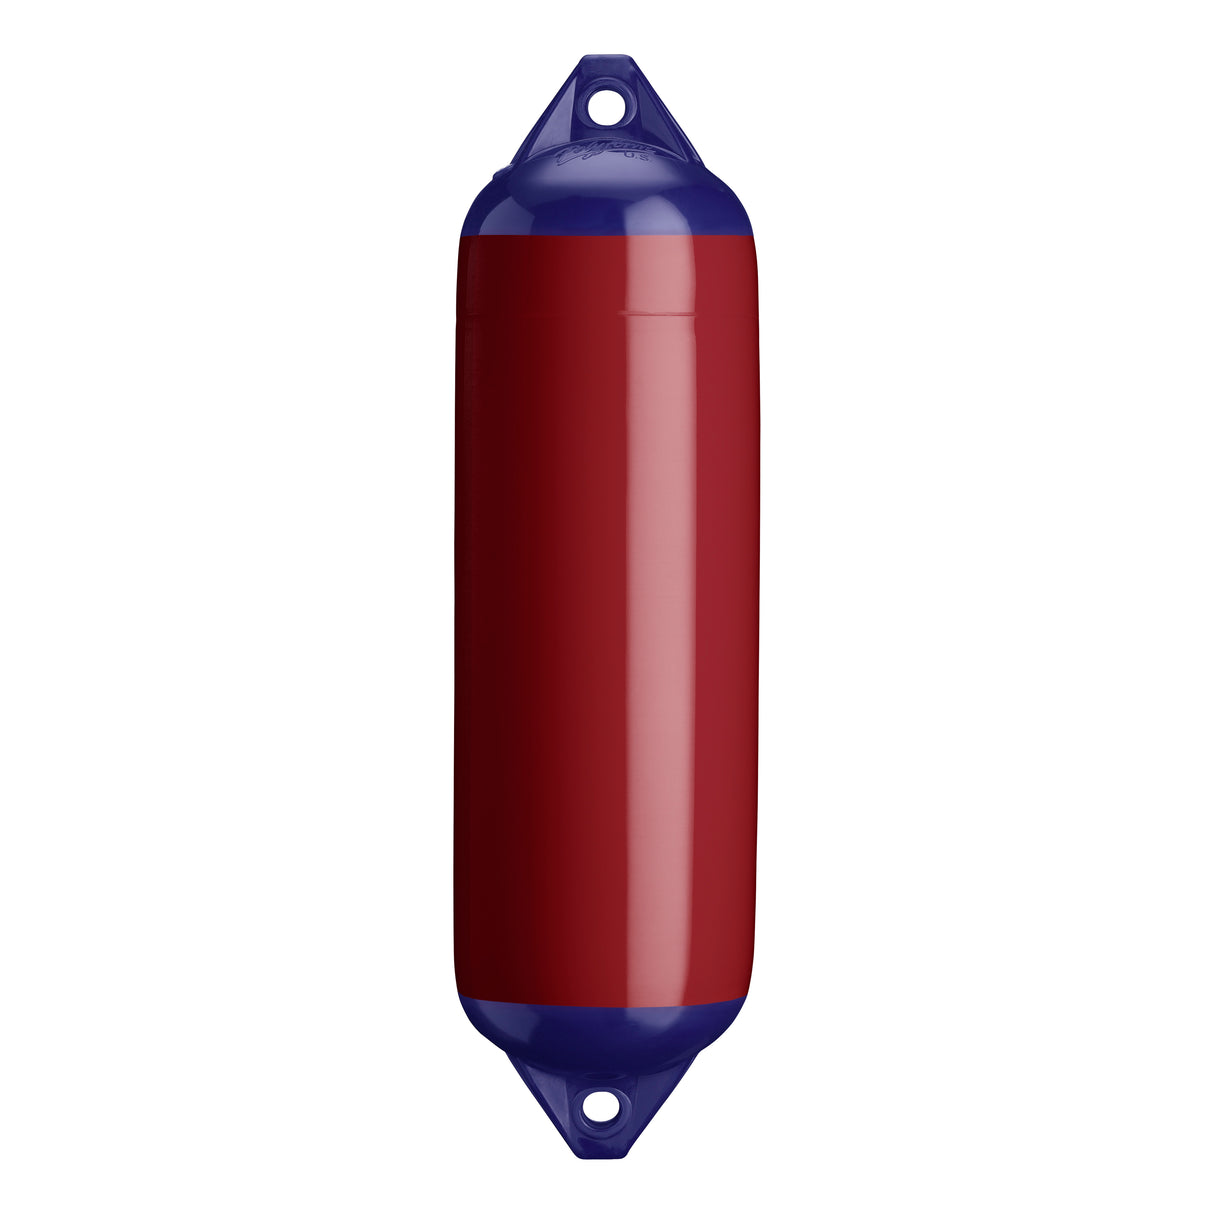 Burgundy boat fender with Navy-Top, Polyform F-3 